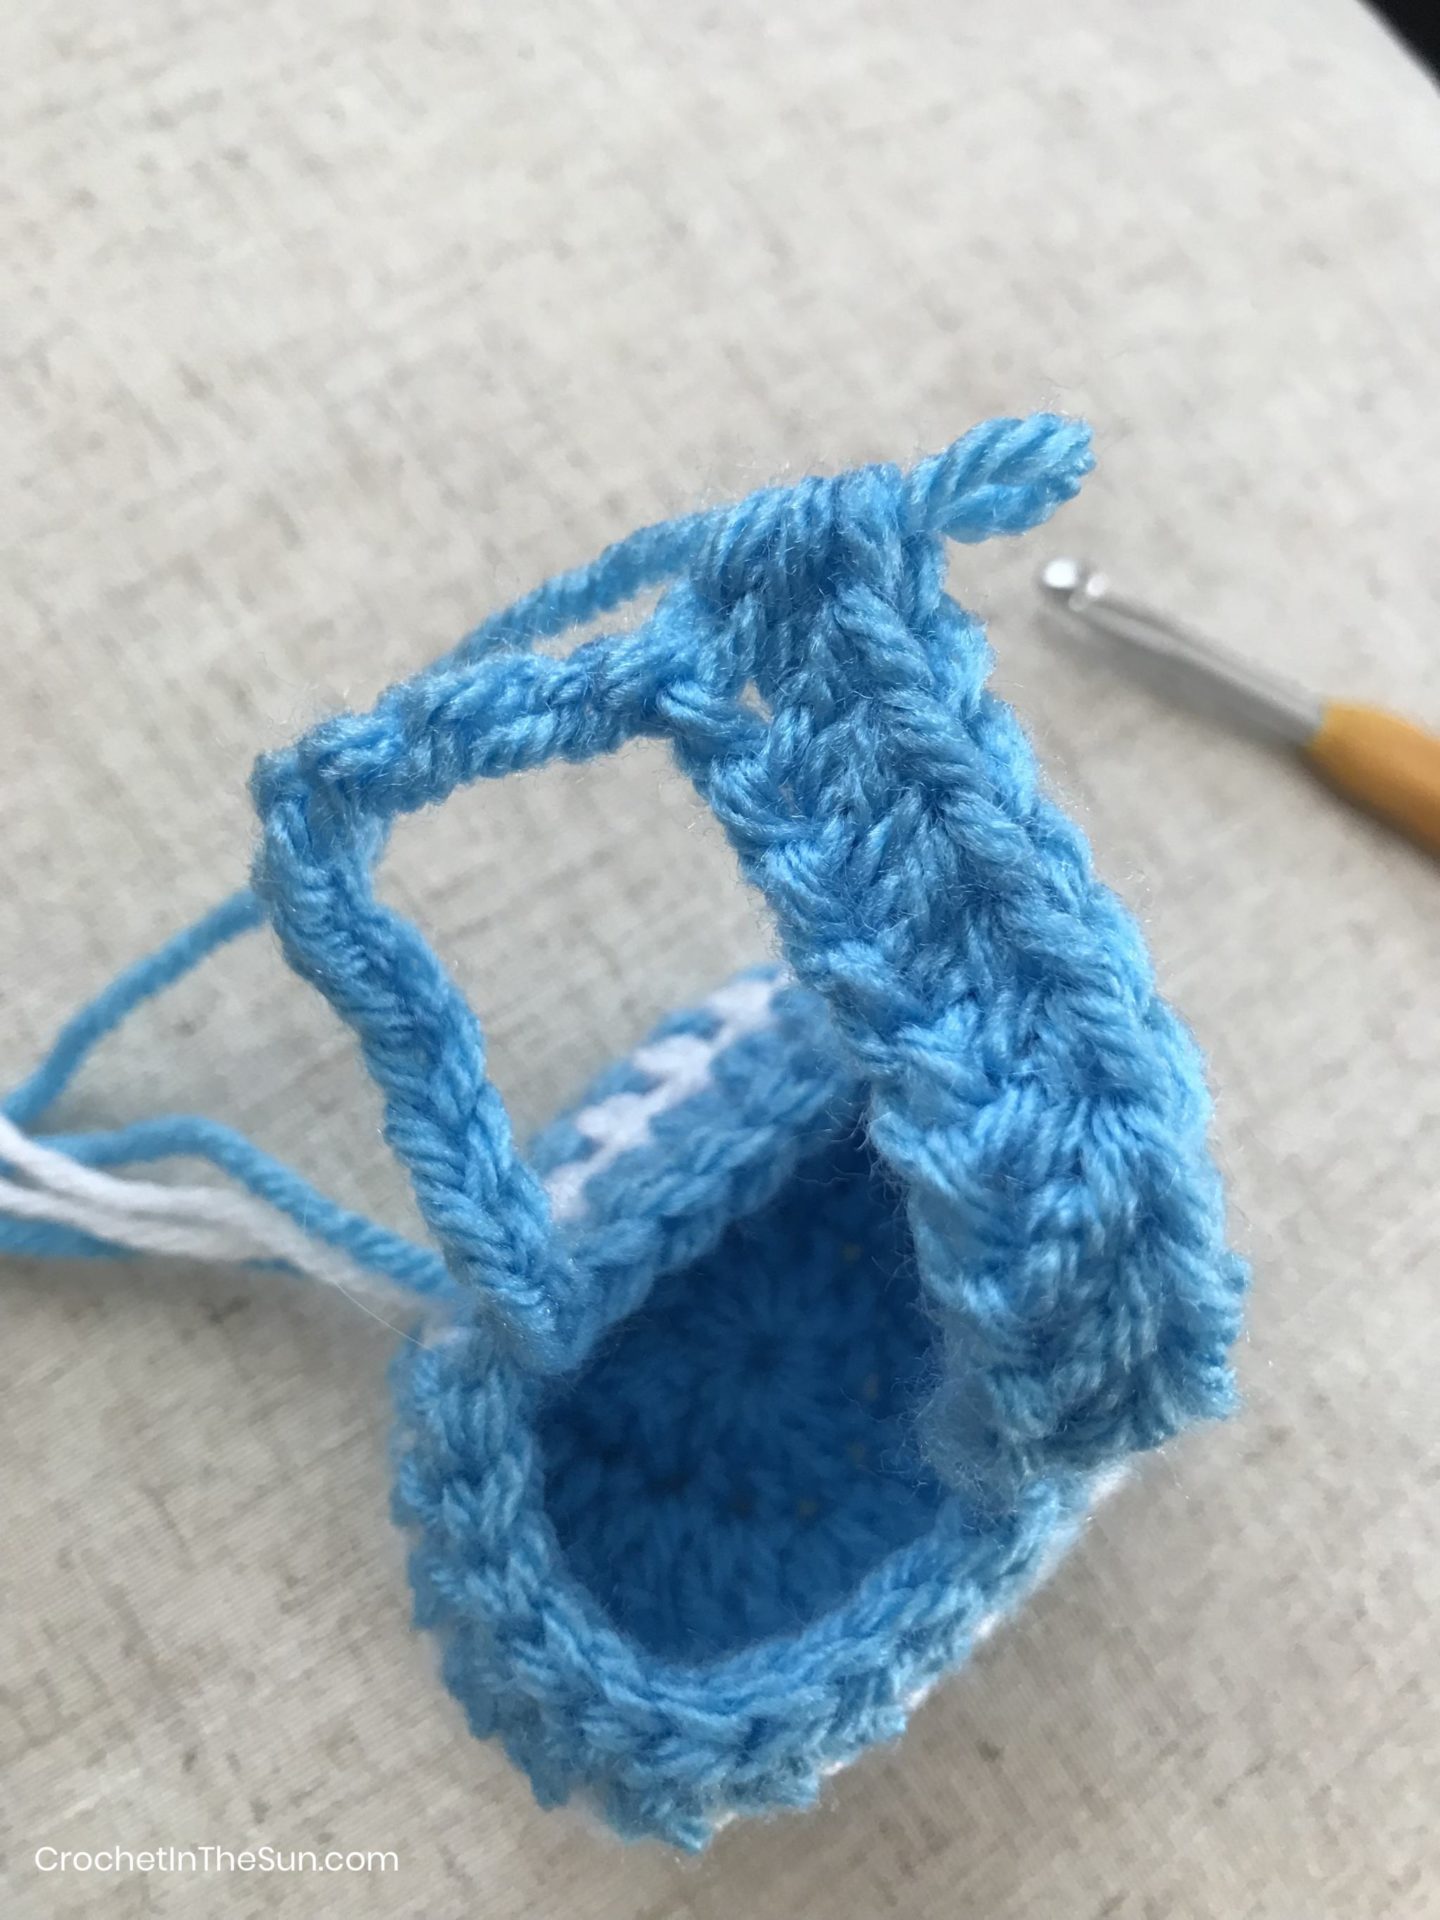 How to make a handle for crochet basket: HDC in each chain to finish building out the basket handle.
#crochet #crochetinthesun #howtocrochet #crochettutorial #crochetforbeginners